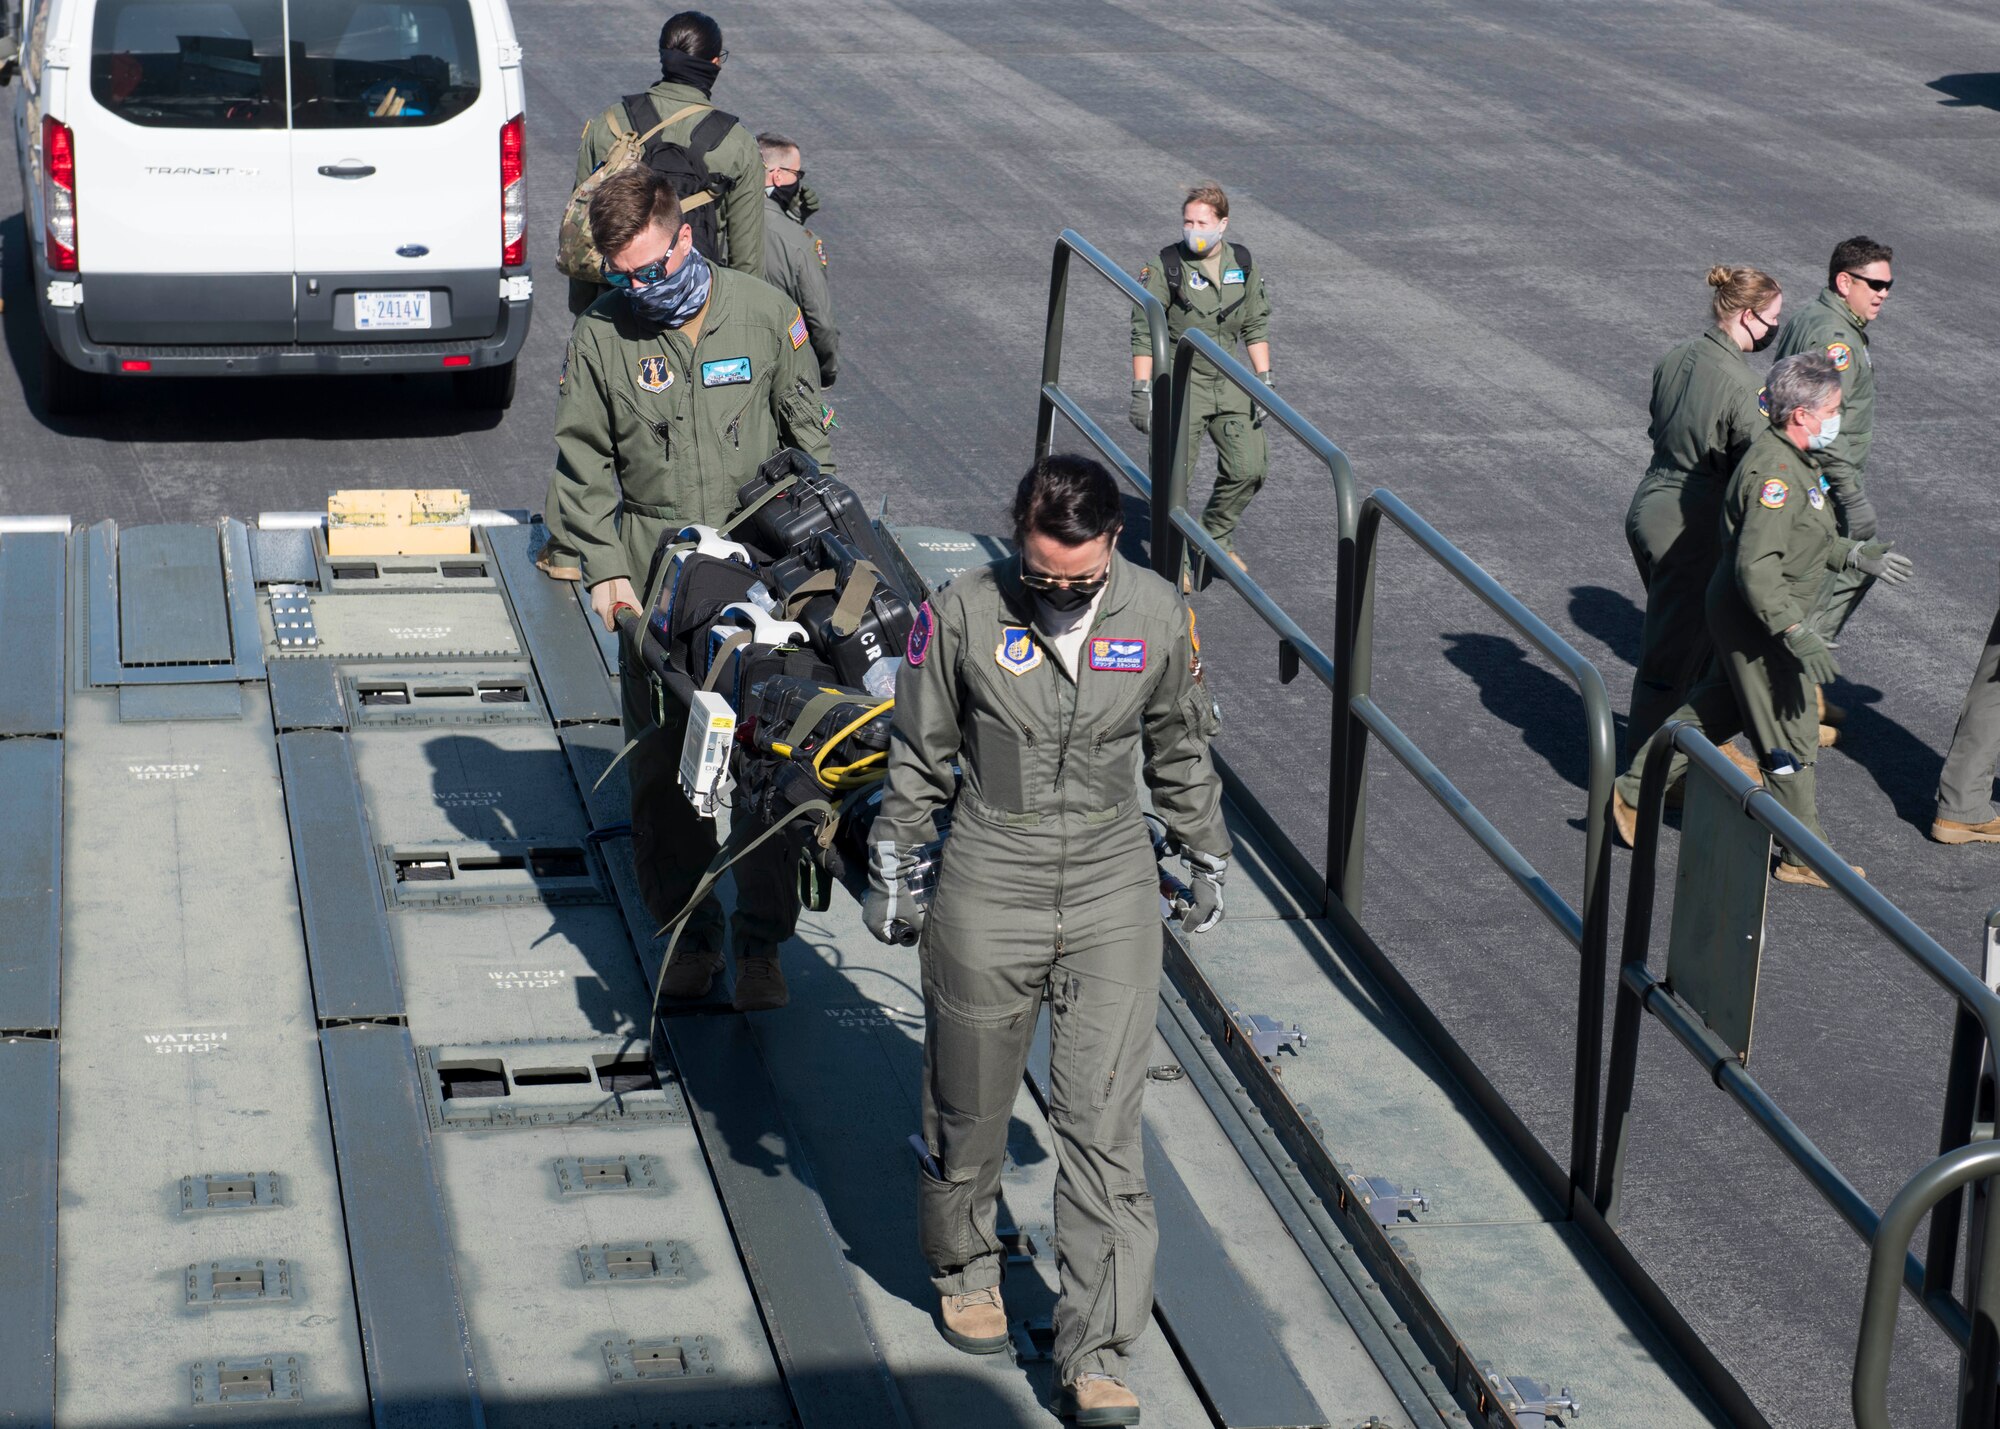 U.S. Air Force Capt. Amanda Scanlon, 18th Aeromedical Evacuation Squadron flight nurse, and U.S. Air National Guard Tech. Sgt. Alex Klinger, 187th AES aeromedical evacuation technician, loaded a litter of AE supplies on a KC-135 Stratotanker at Joint Base Pearl Harbor-Hickam, Hawaii, Nov. 10, 2020. By working with Pacific Air Force and Total Force partners from the 187th AES and 18th AES, Team Fairchild Airmen were able to ensure a continued investment in a high quality of life and medical service for Airmen and joint partners in the Pacific. (U.S. Air Force photo by Senior Airman Lawrence Sena)